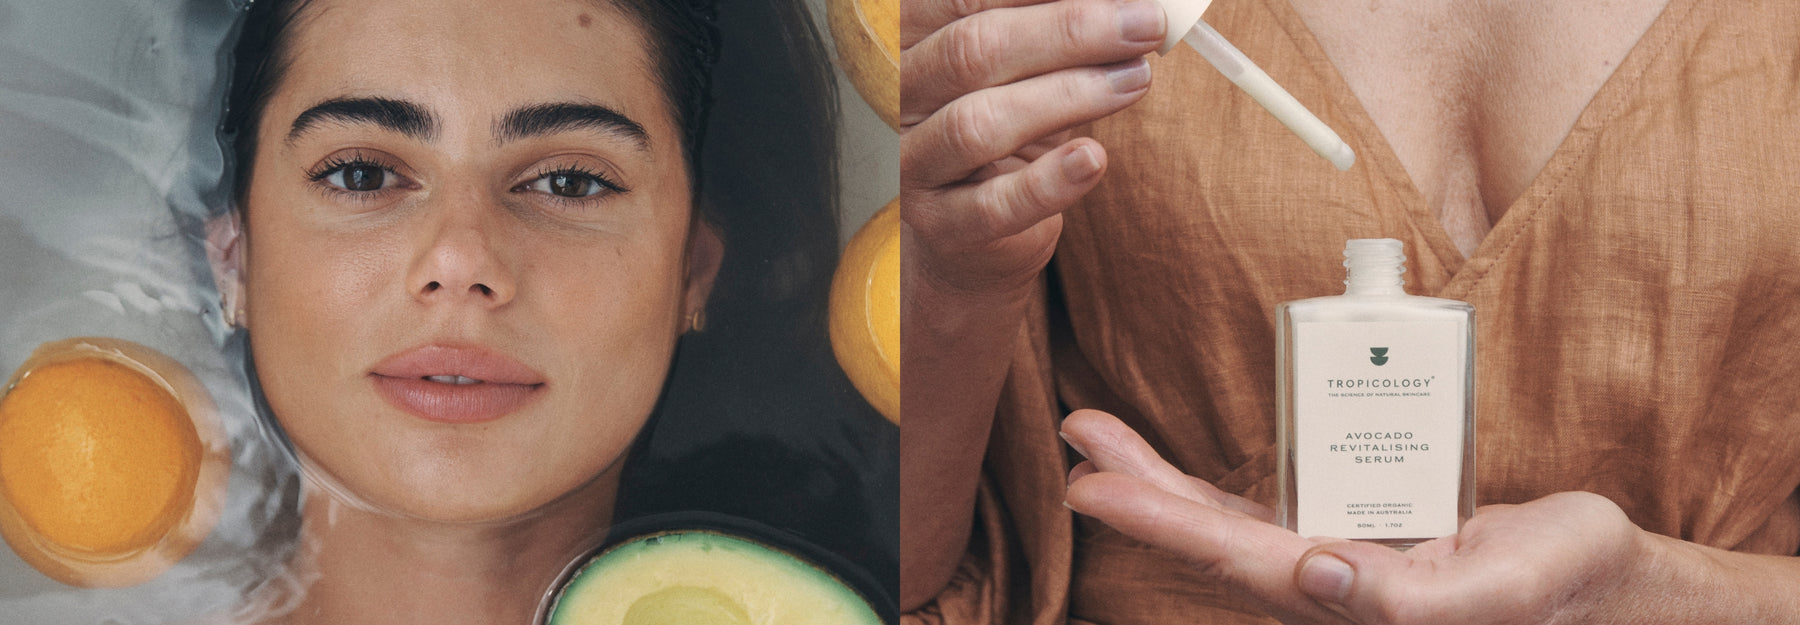 The Science Behind Organic Skincare — The Benefits of Avocado and Active Botanicals